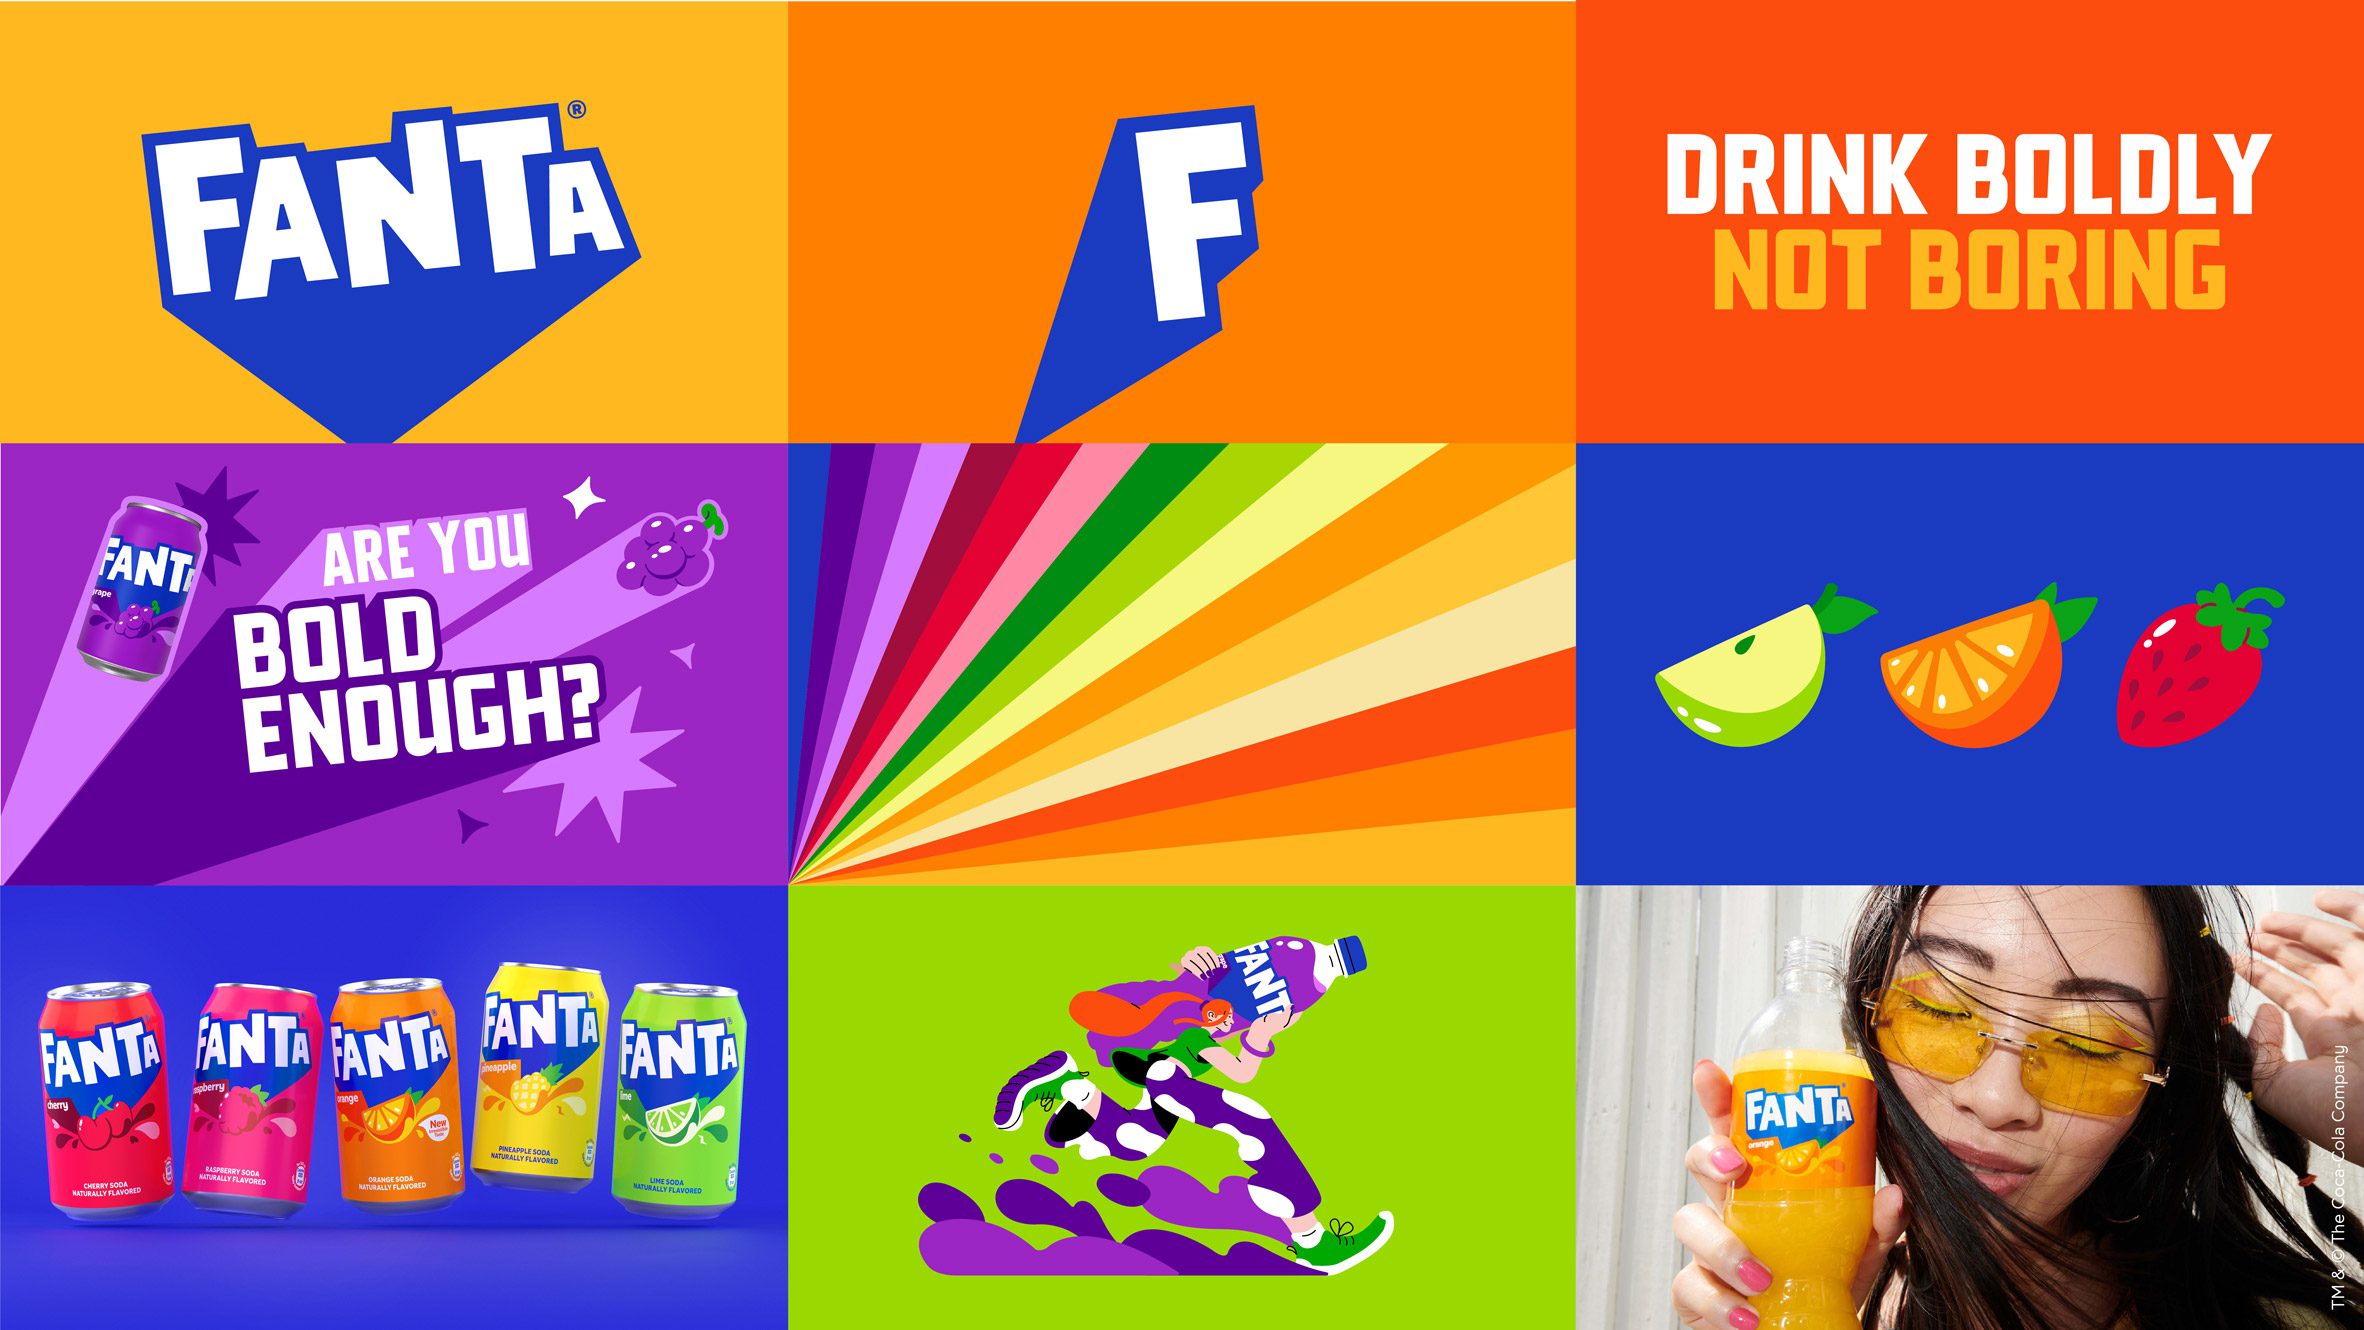 With Fanta's new logo, Coca-Cola ditches the fruit